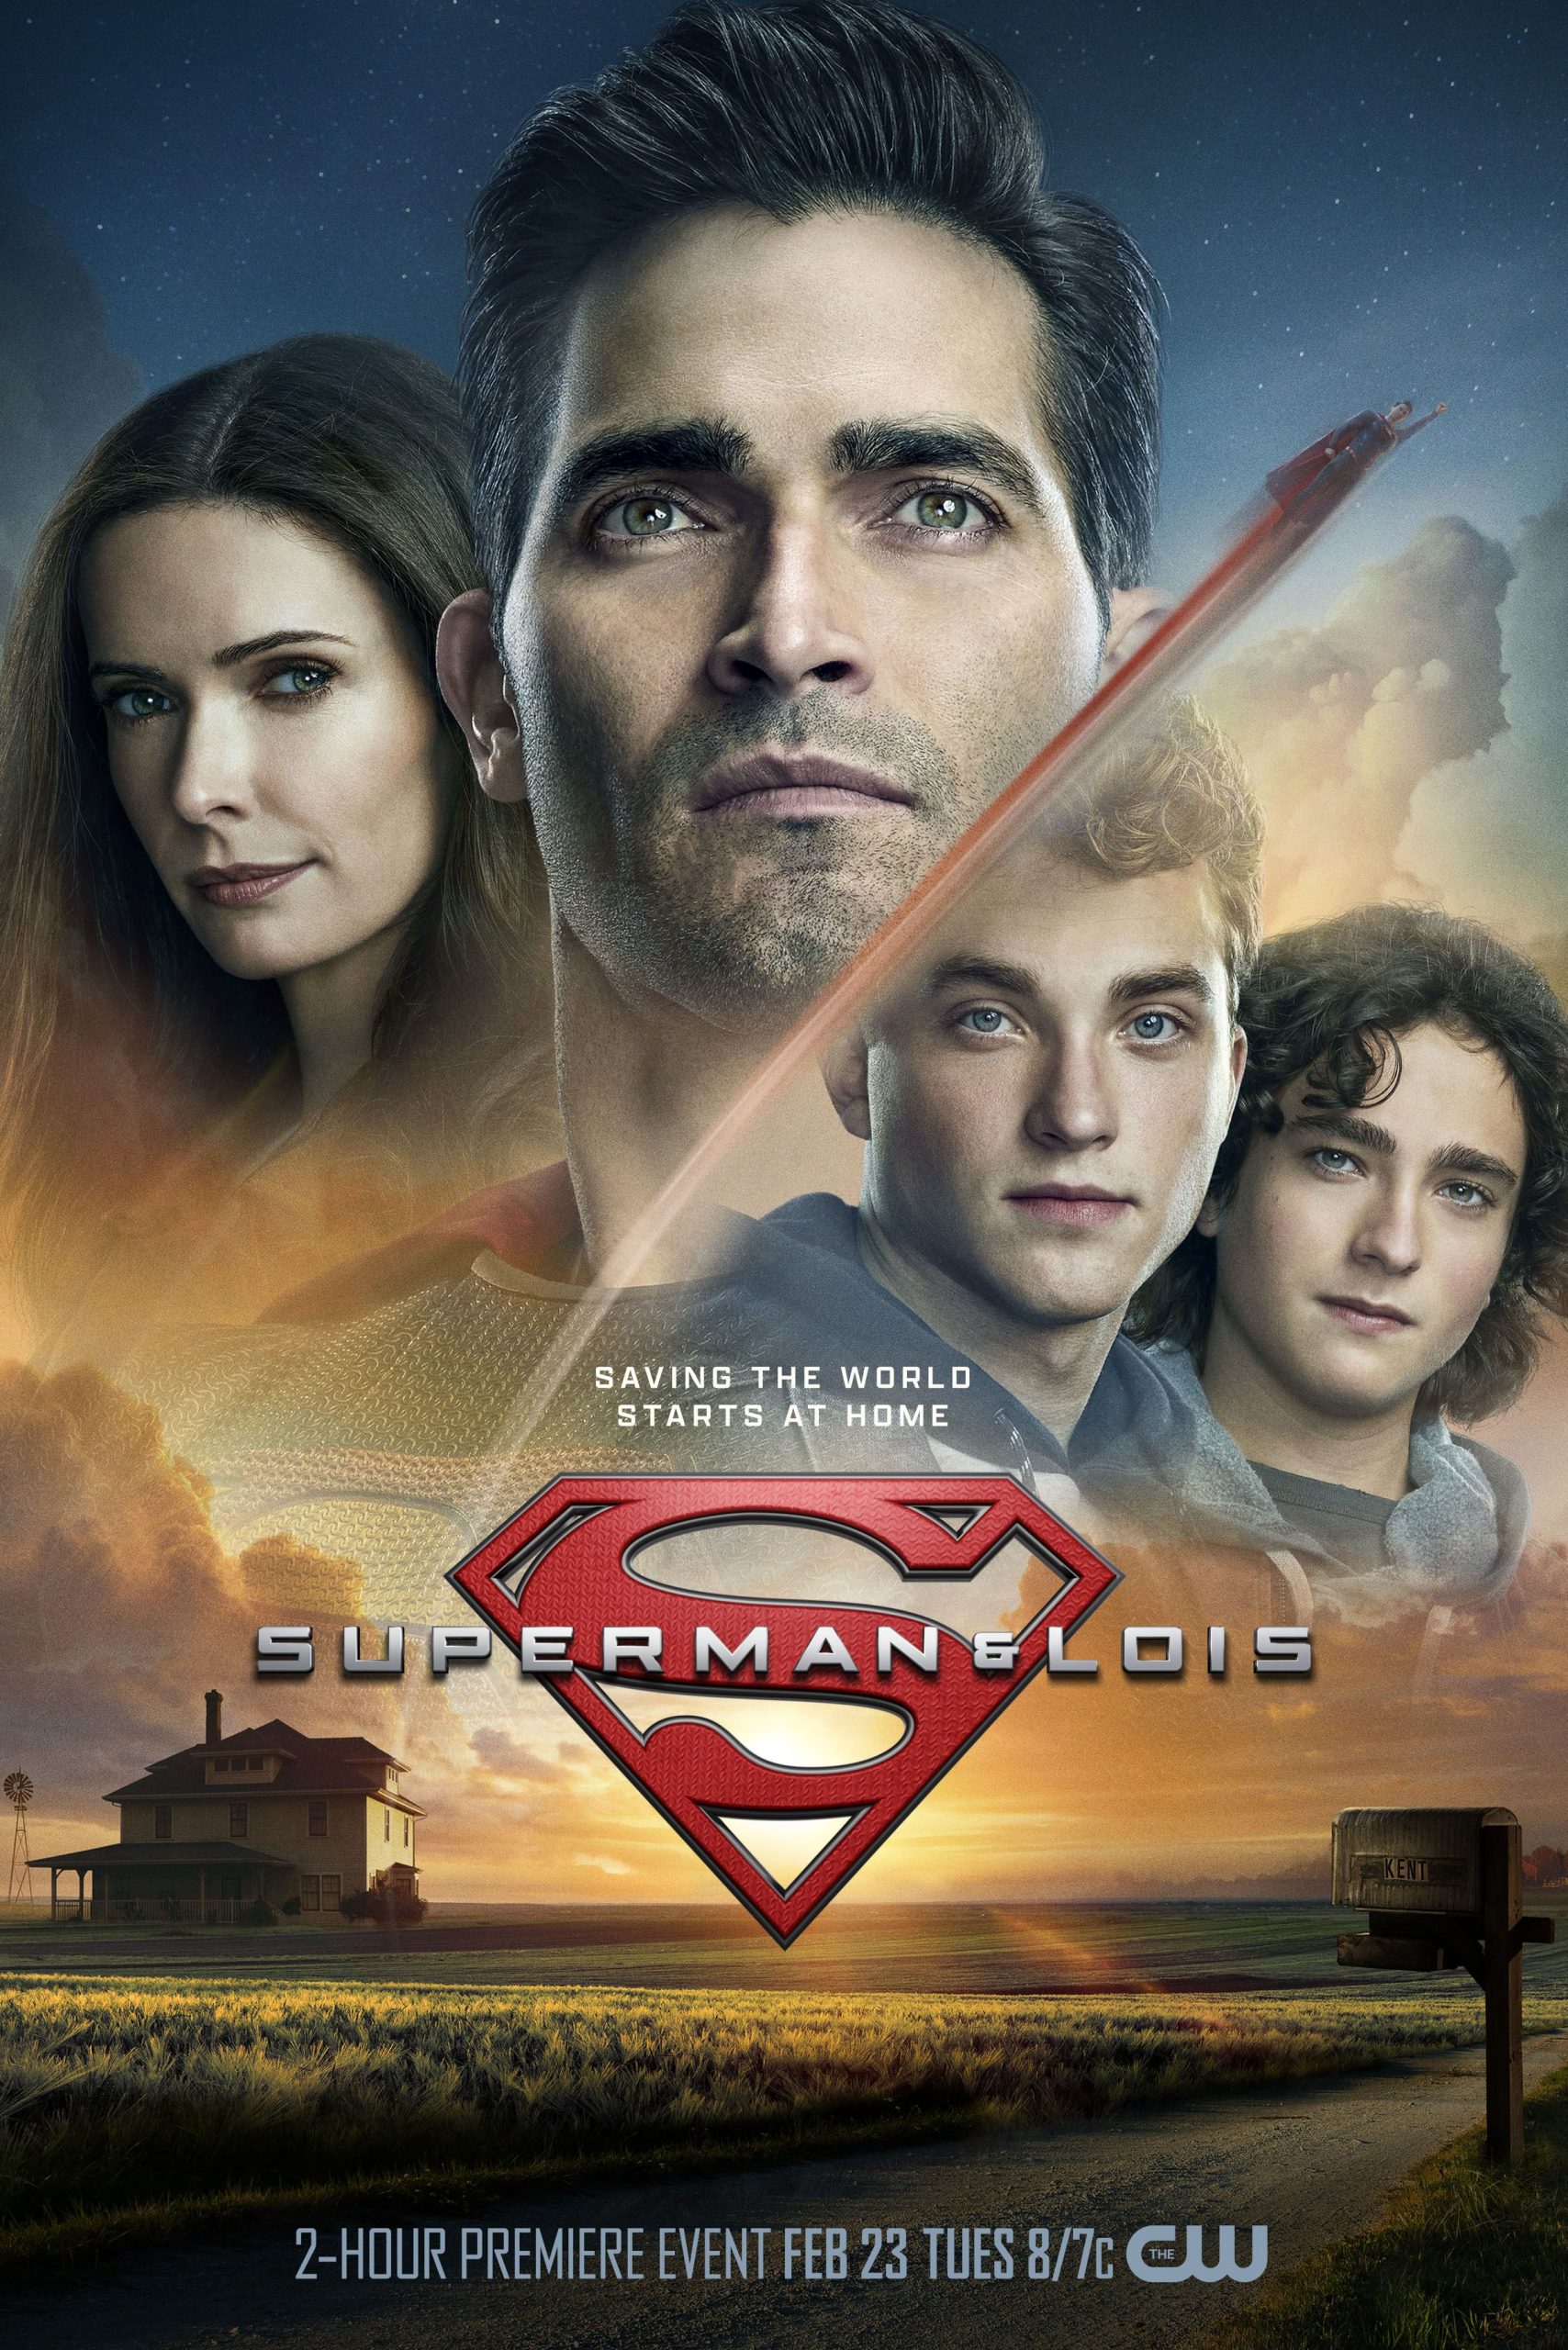 ‘Superman and Lois’: For the Love of God, Why?